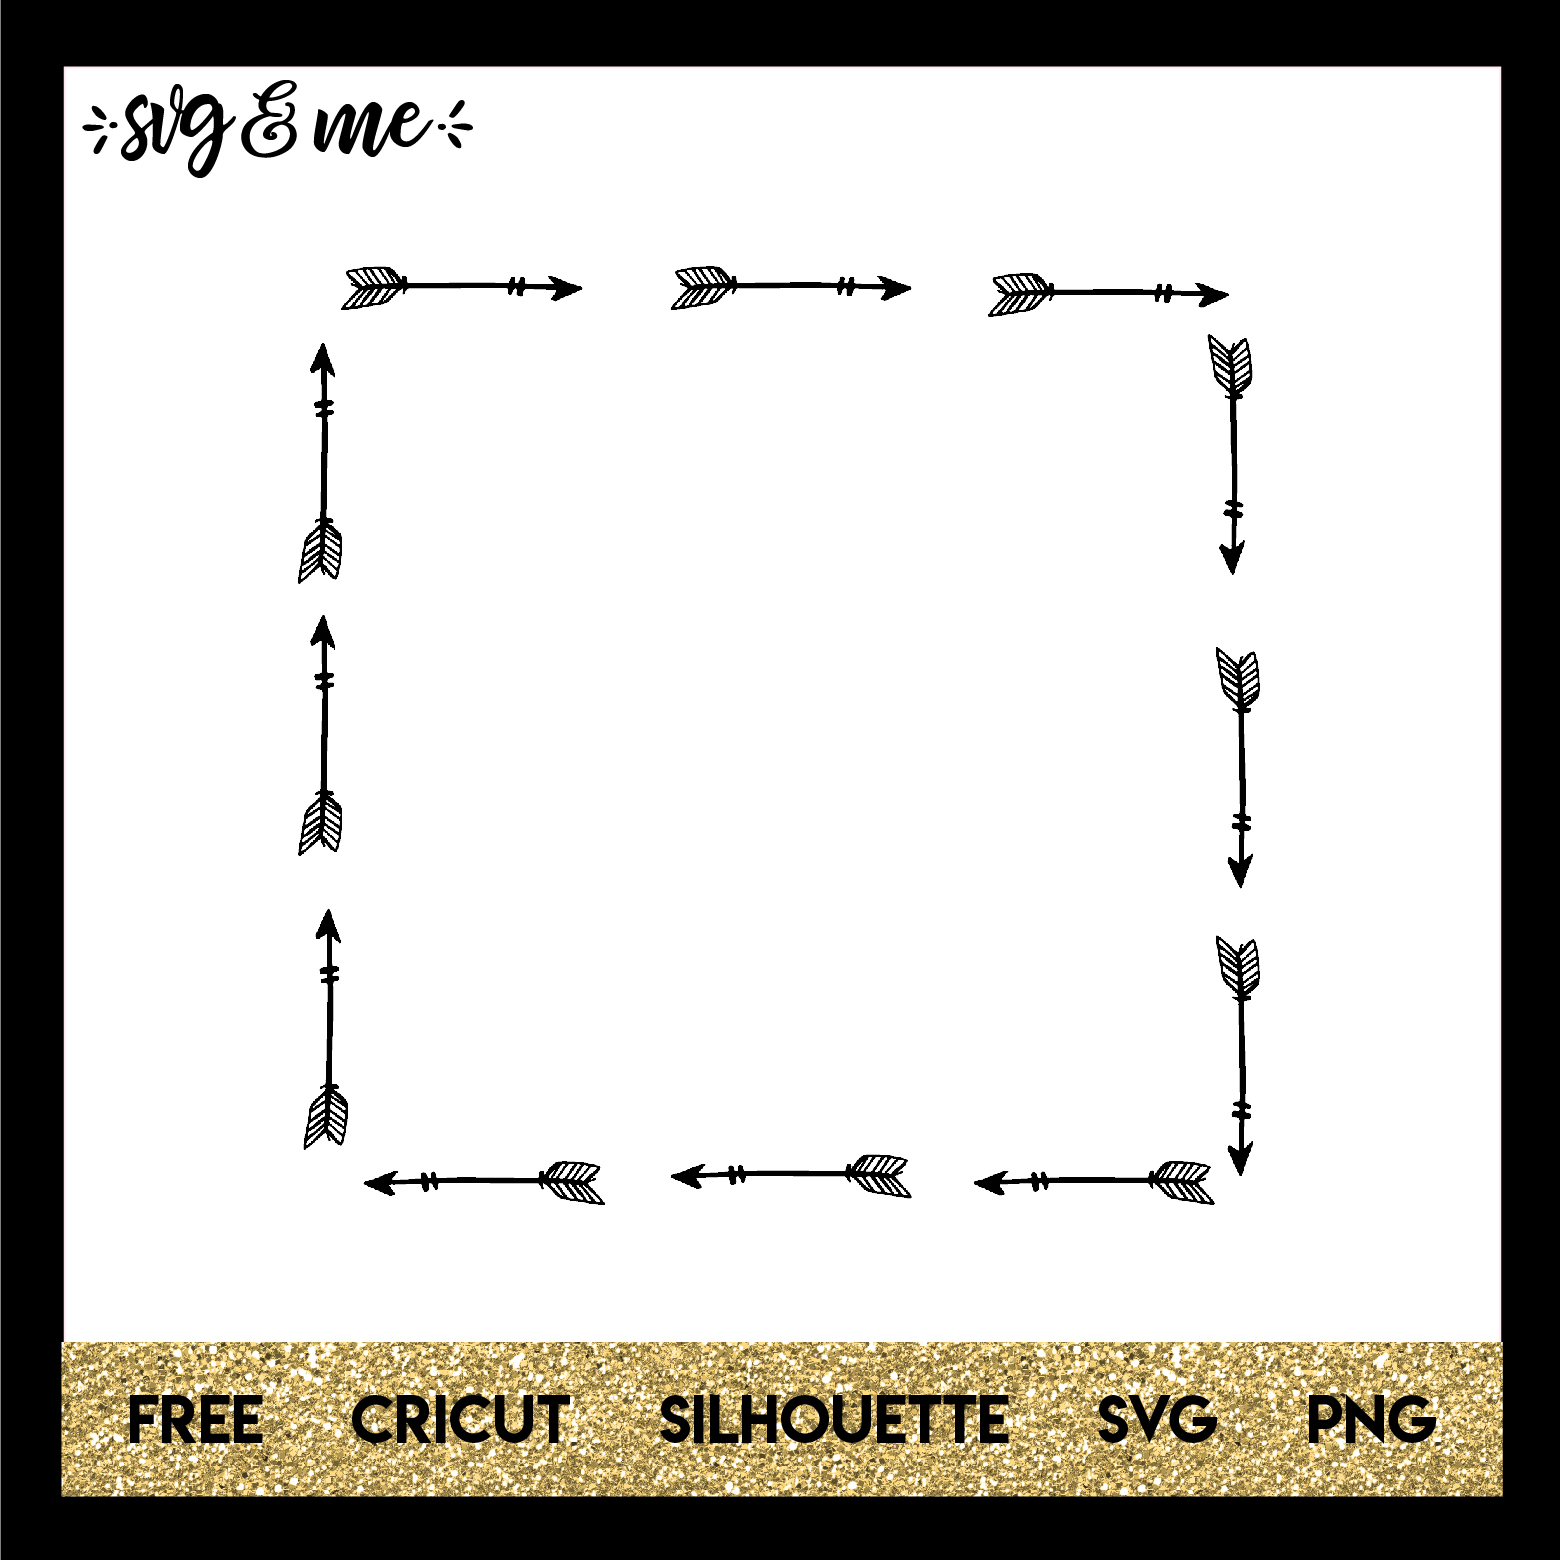 FREE SVG CUT FILE for Cricut, Silhouette and more - Arrow Frame SVG